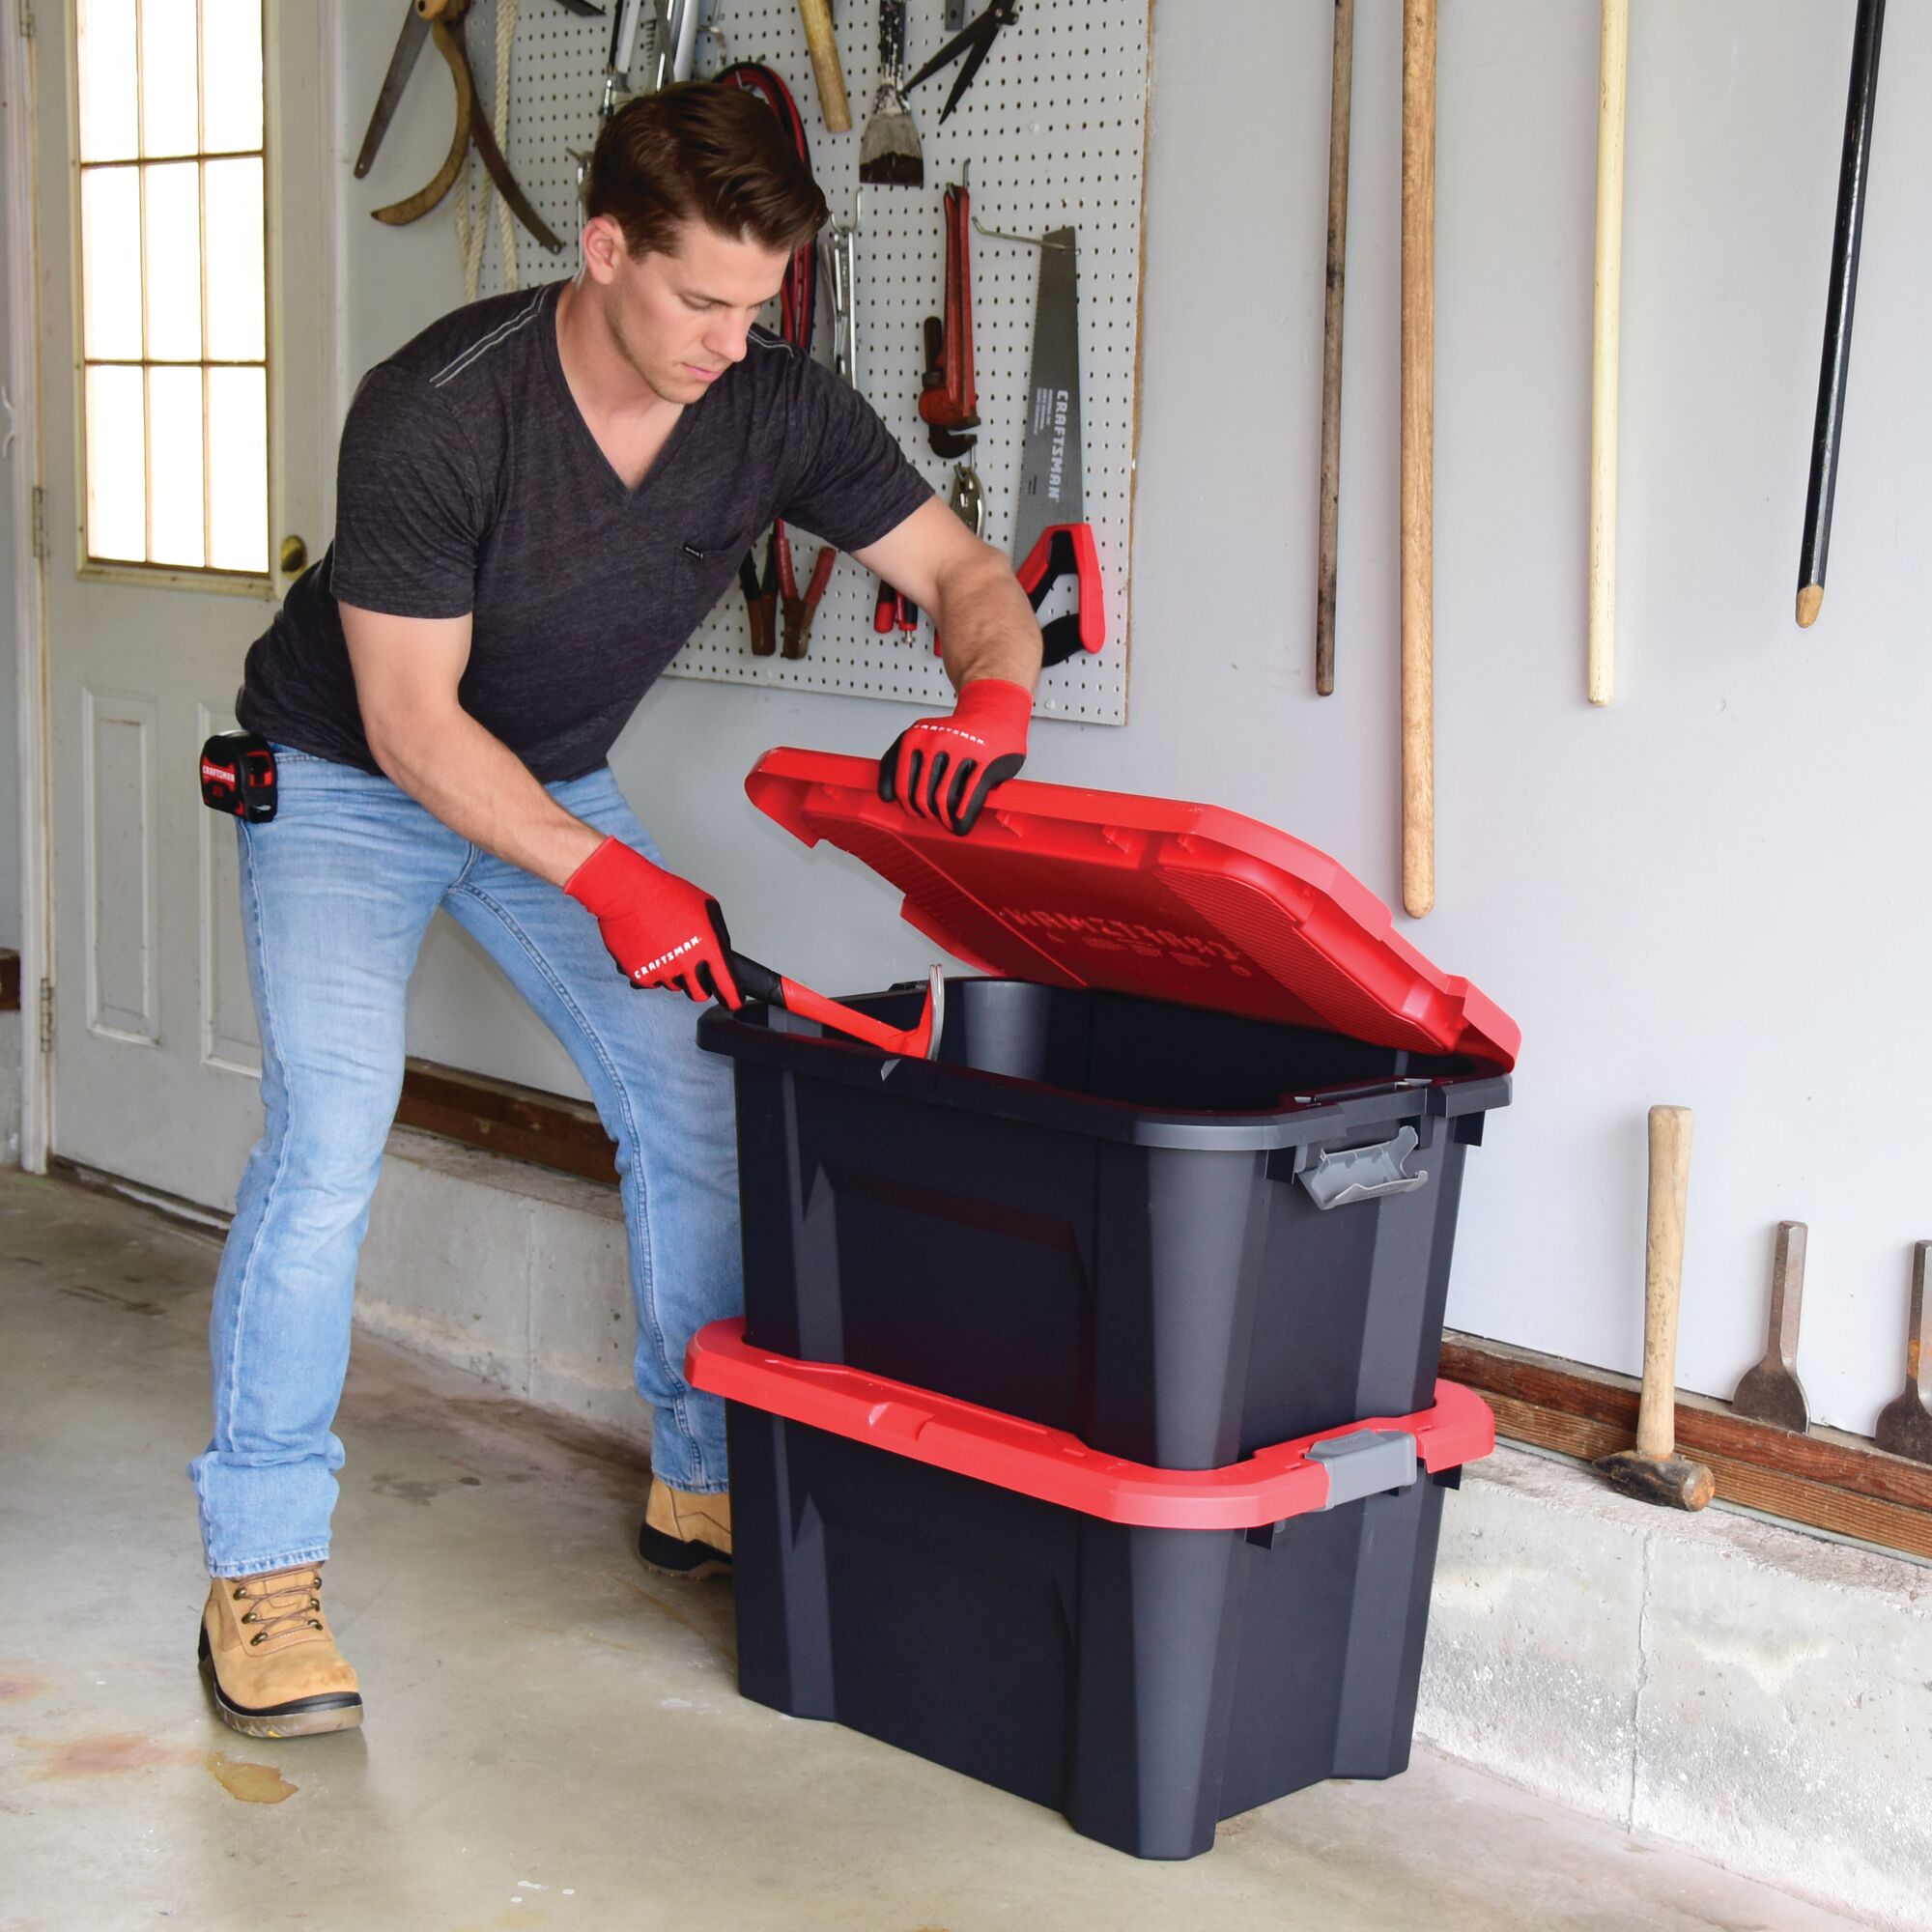 20 Gallon latching tote being used by a person to store tools.